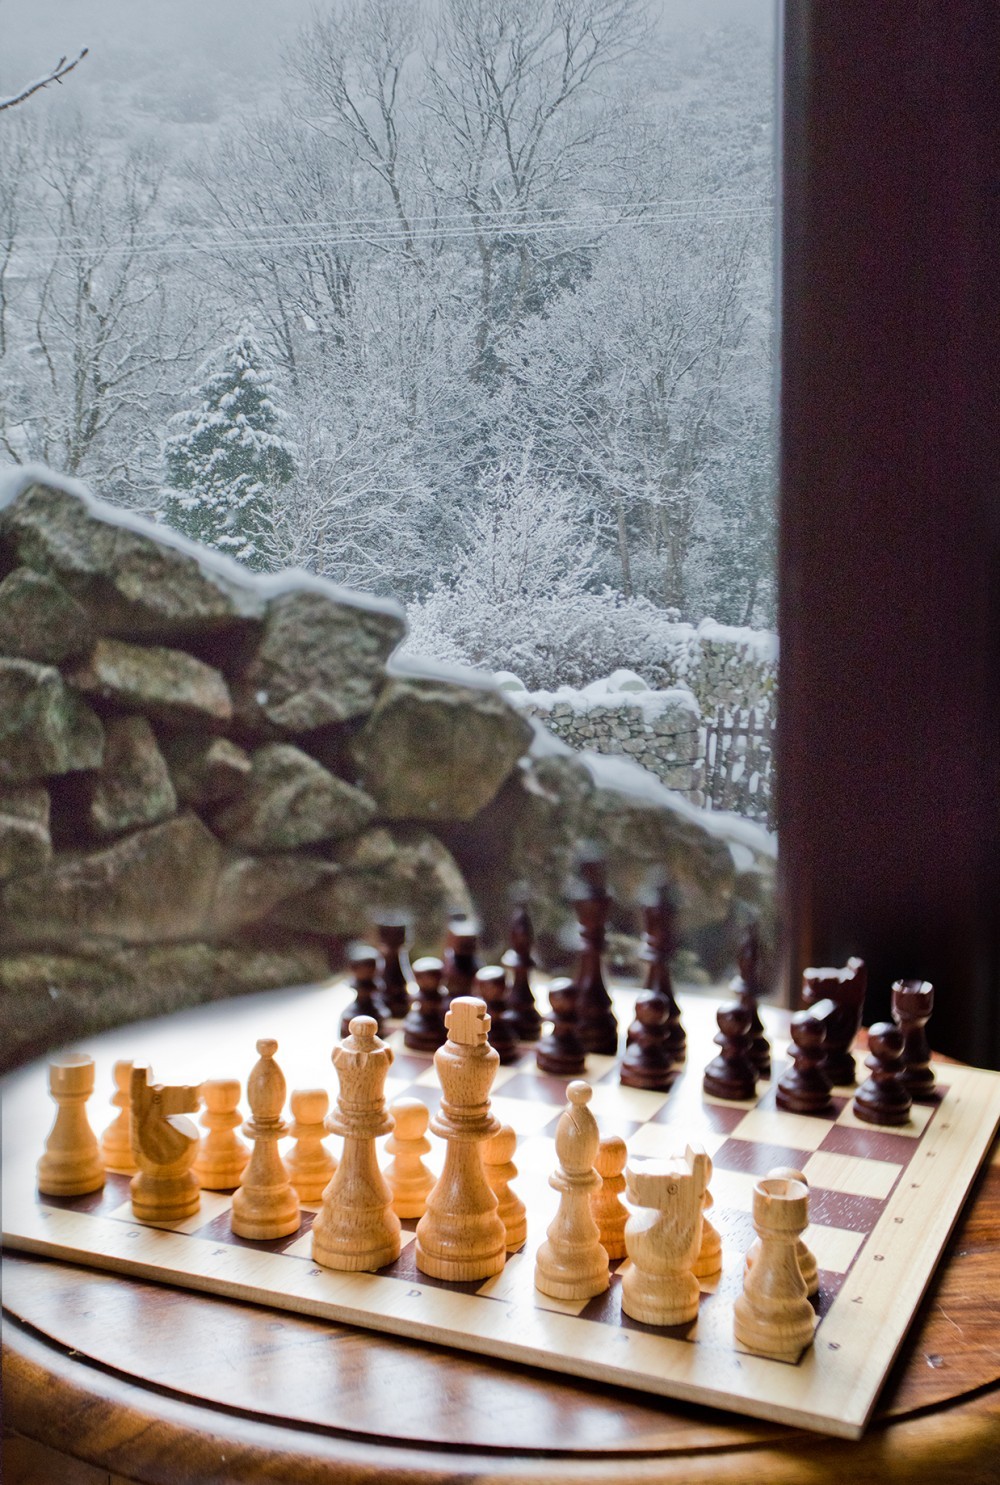 Relax with a game of chess